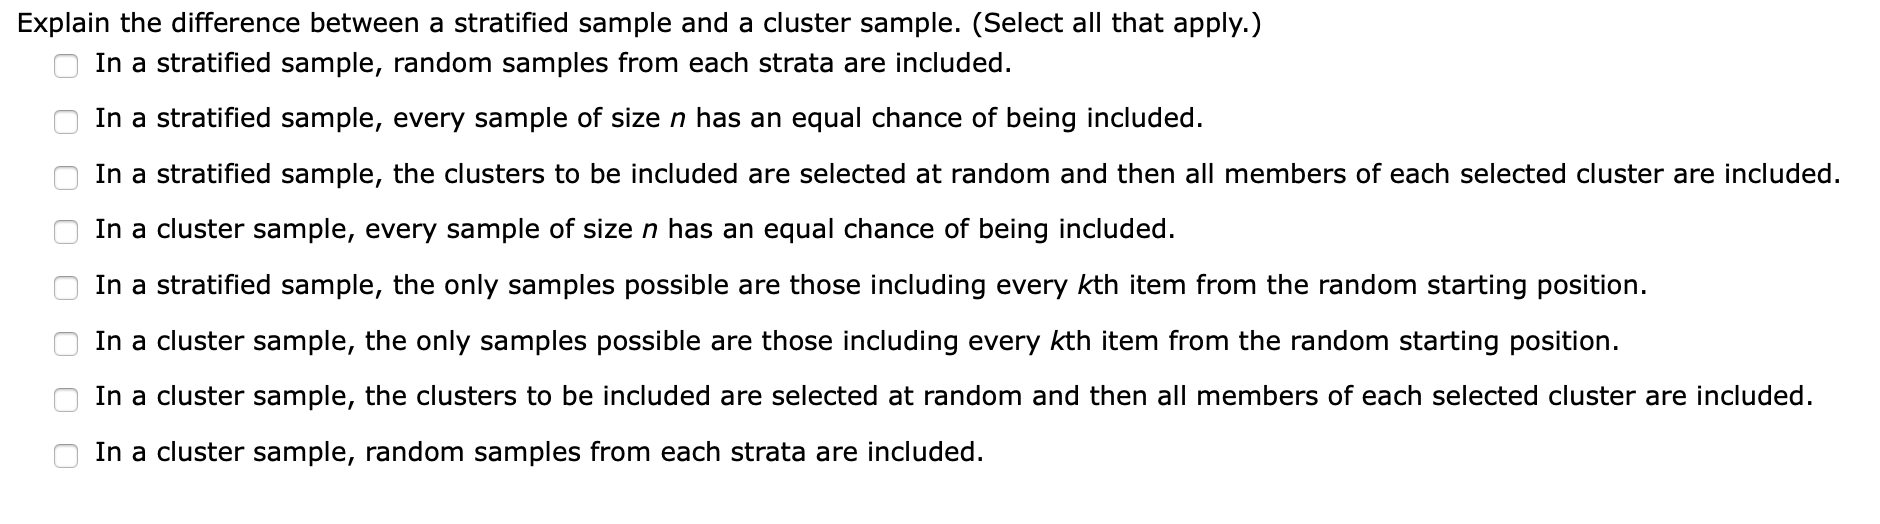 Explain the difference between a stratified sample and a cluster sample. (Select all that apply.)
In a stratified sample, random samples from each strata are included
In a stratified sample, every sample of size n has an equal chance of being included.
In a stratified sample, the clusters to be included are selected at random and then all members of each selected cluster are included
In a cluster sample, every sample of size n has an equal chance of being included.
In a stratified sample, the only samples possible are those including every kth item from the random starting position
In a cluster sample, the only samples possible are those including every kth item from the random starting position
In a cluster sample, the clusters to be included are selected at random and then all members of each selected cluster are included.
In a cluster sample, random
les from each strata are included.
